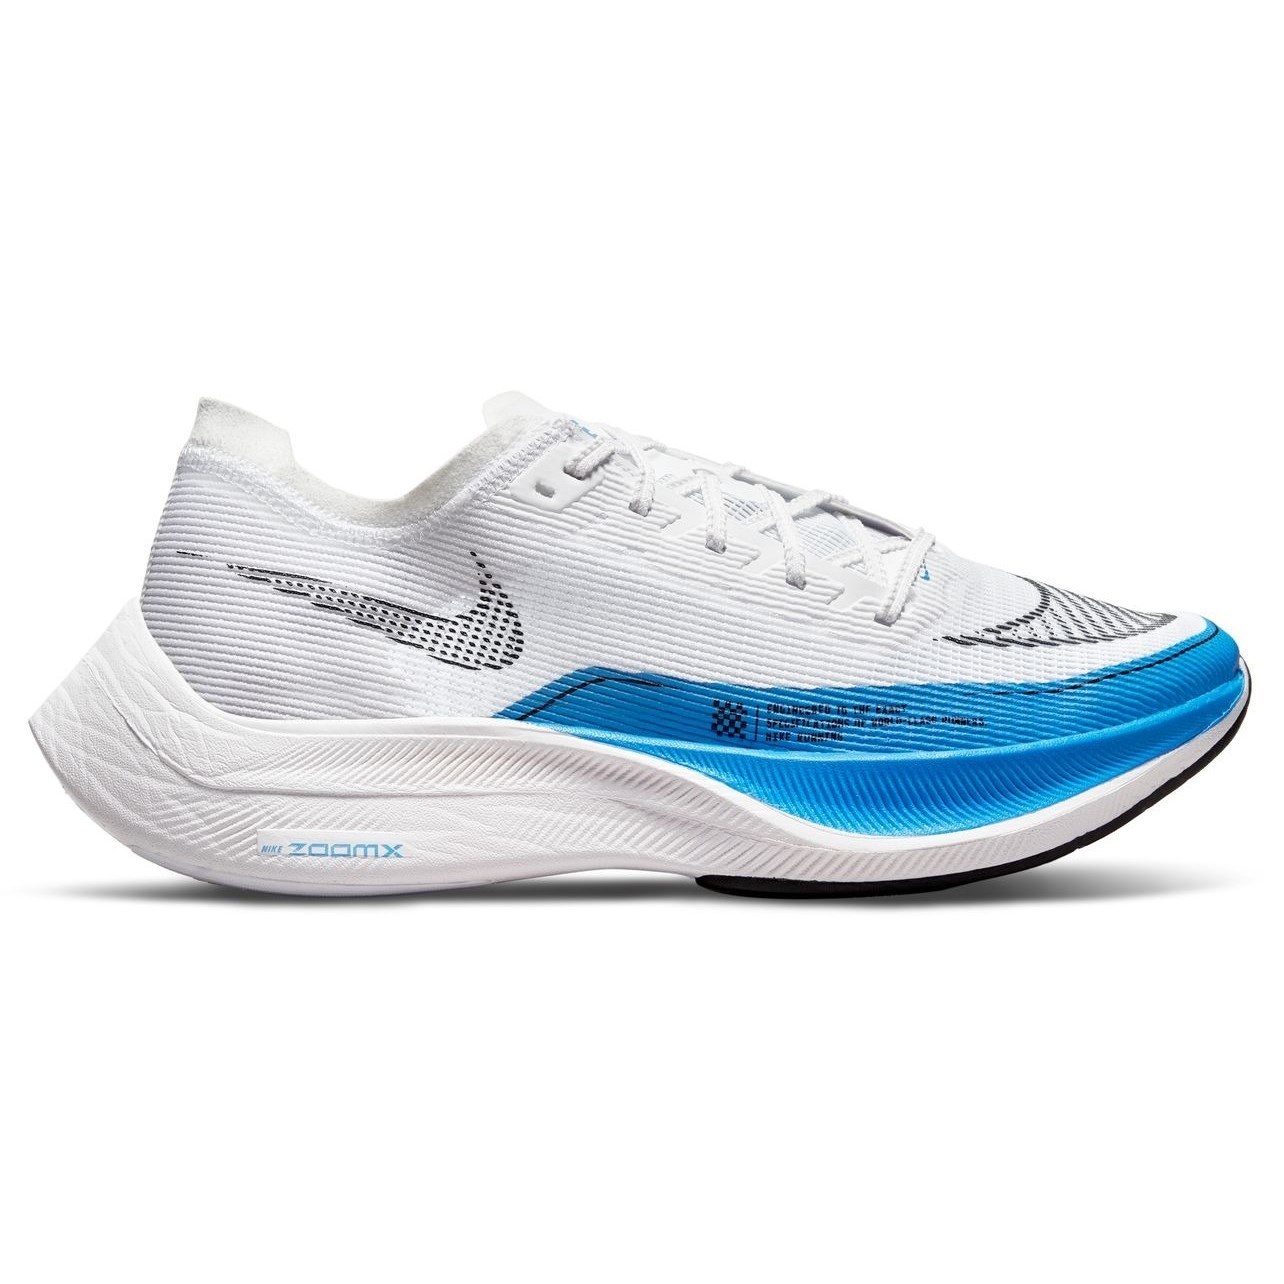 Nike ZoomX Vaporfly Next% 2 - Mens Running Shoes - White/Photo Blue ...